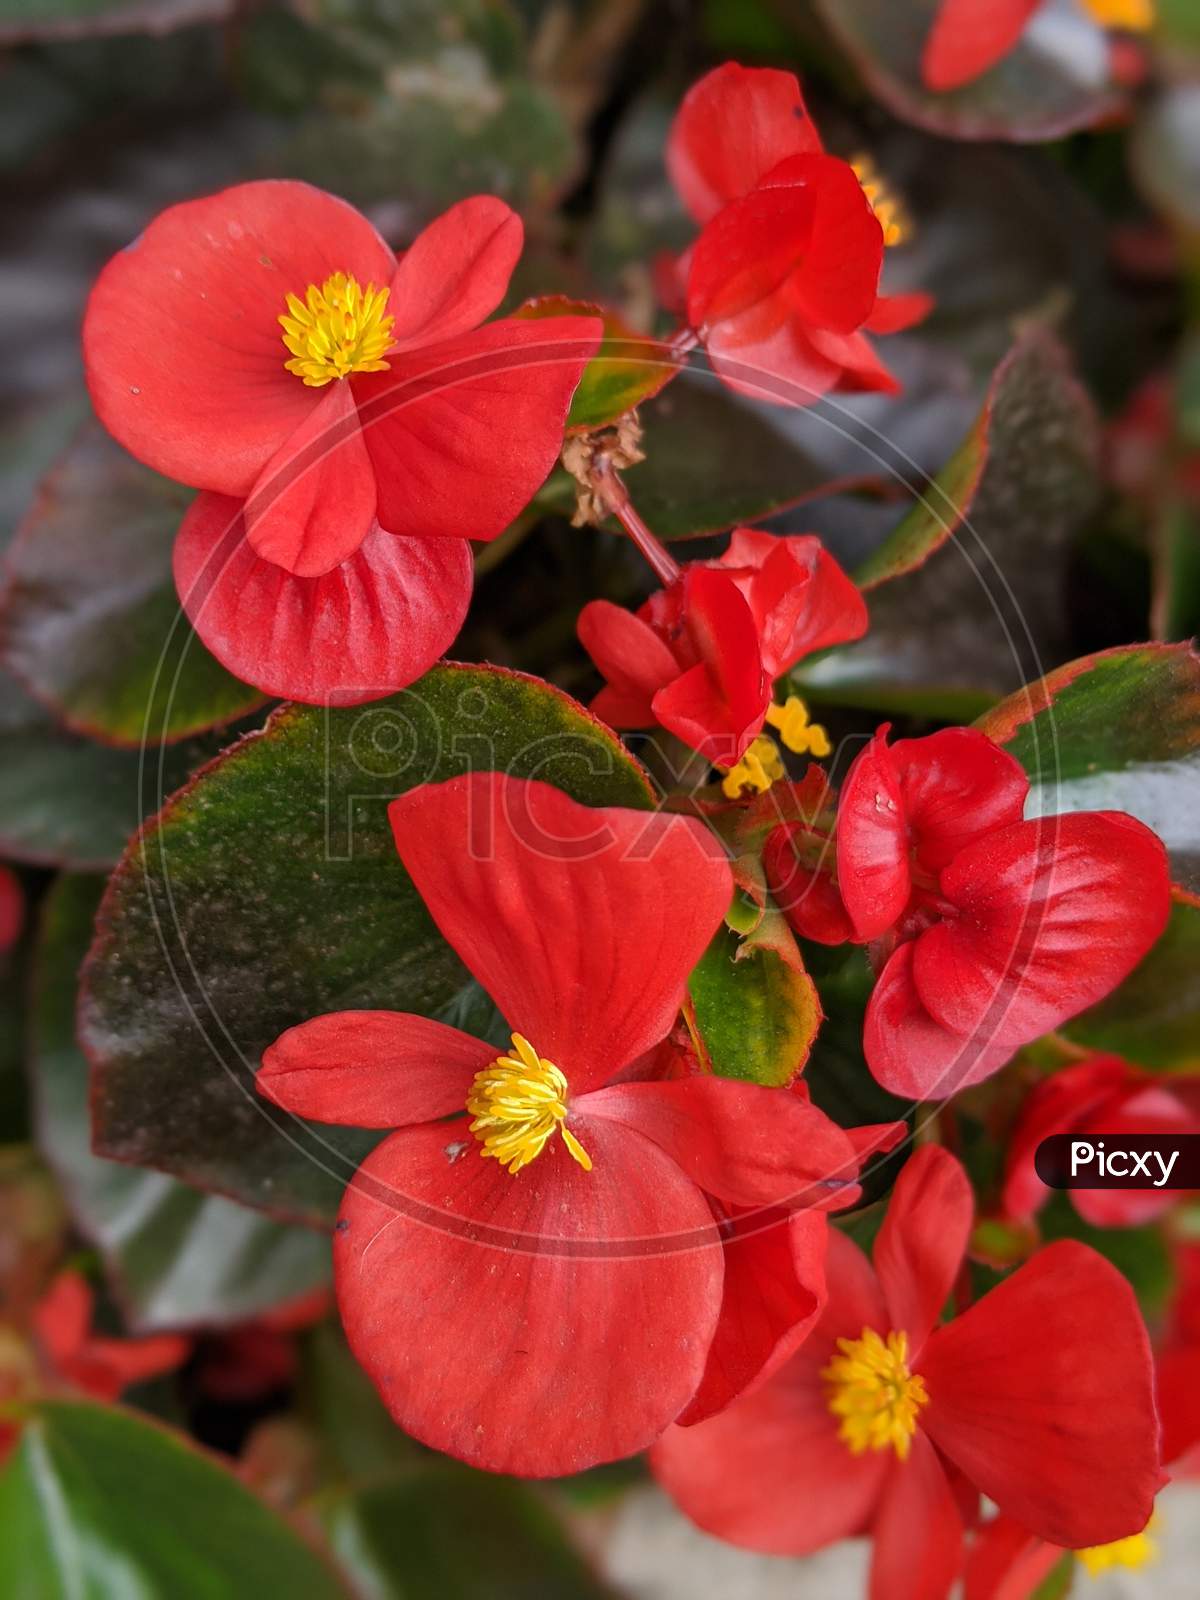 Begonia begonia Red flower with yellow center.